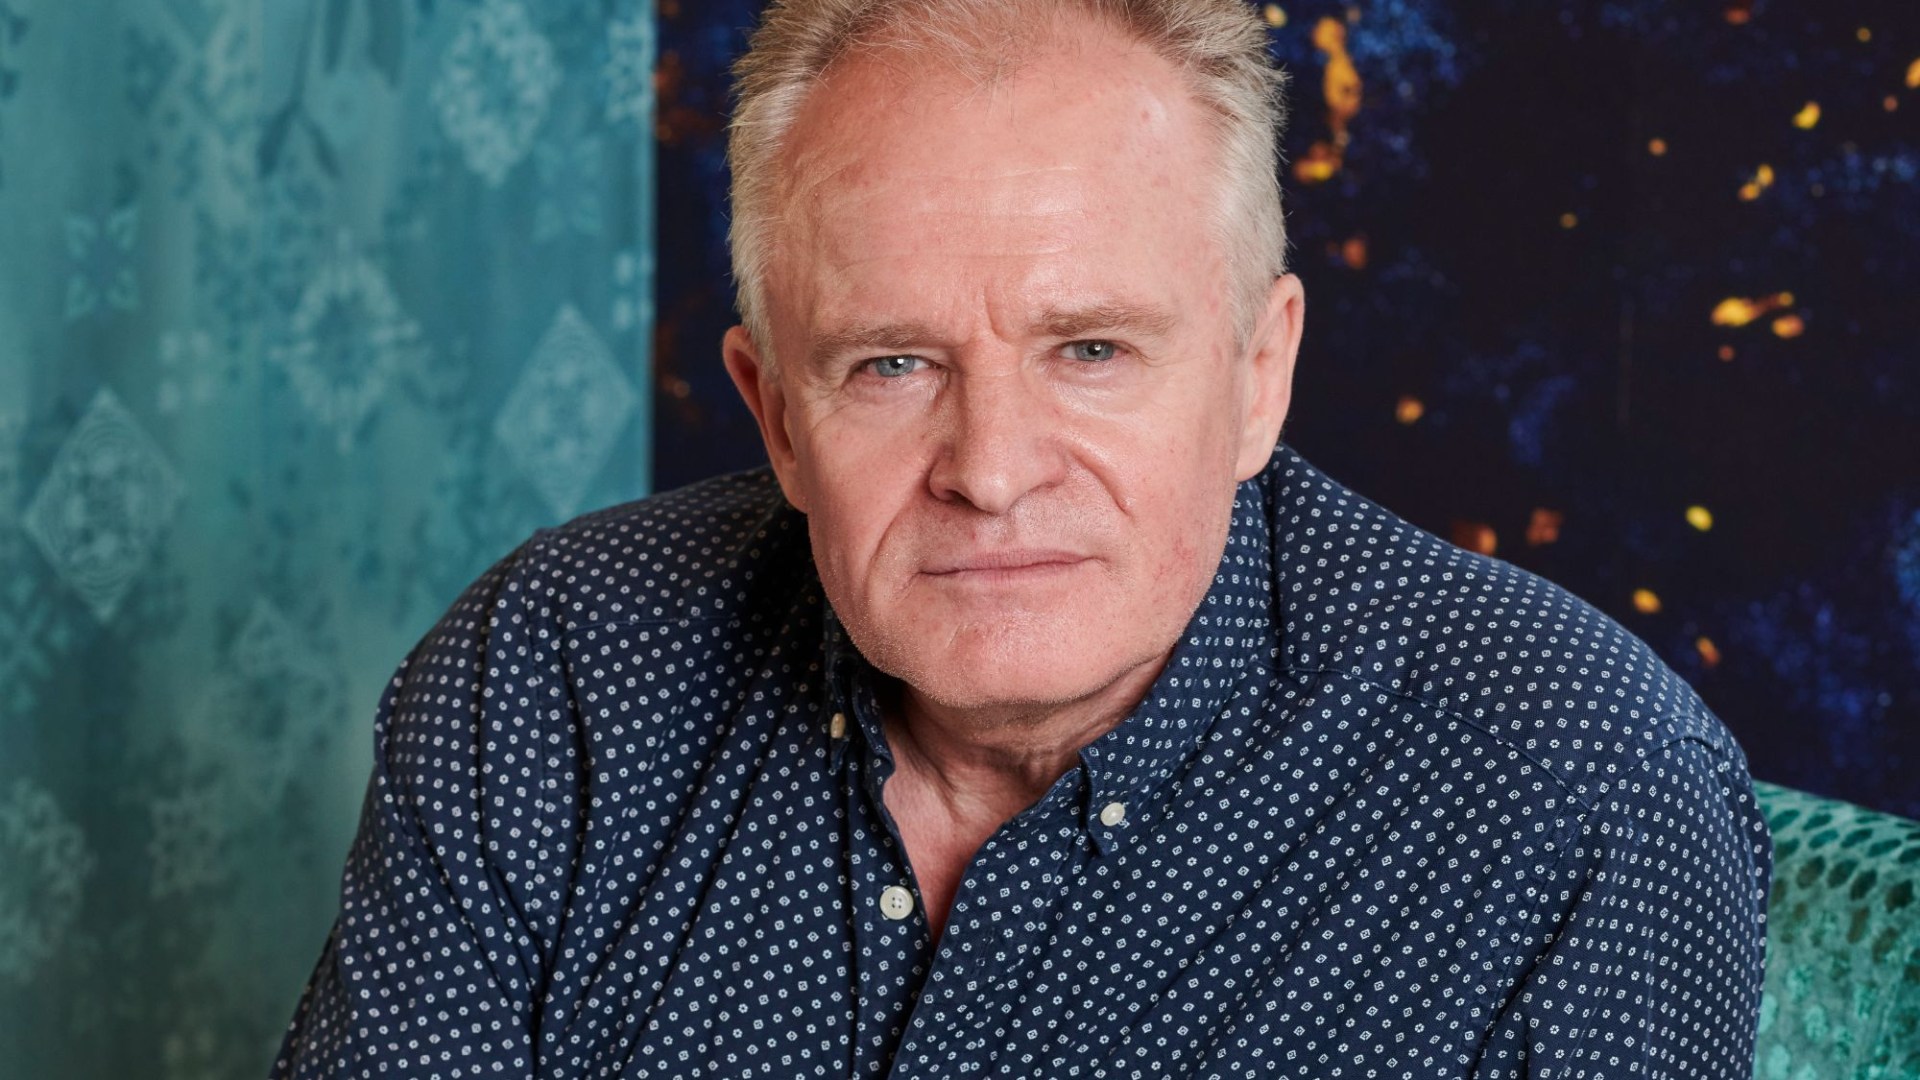 Ex-EastEnders star Bobby Davro returns to the stage after having a stroke and gets standing ovation from cheering crowd [Video]